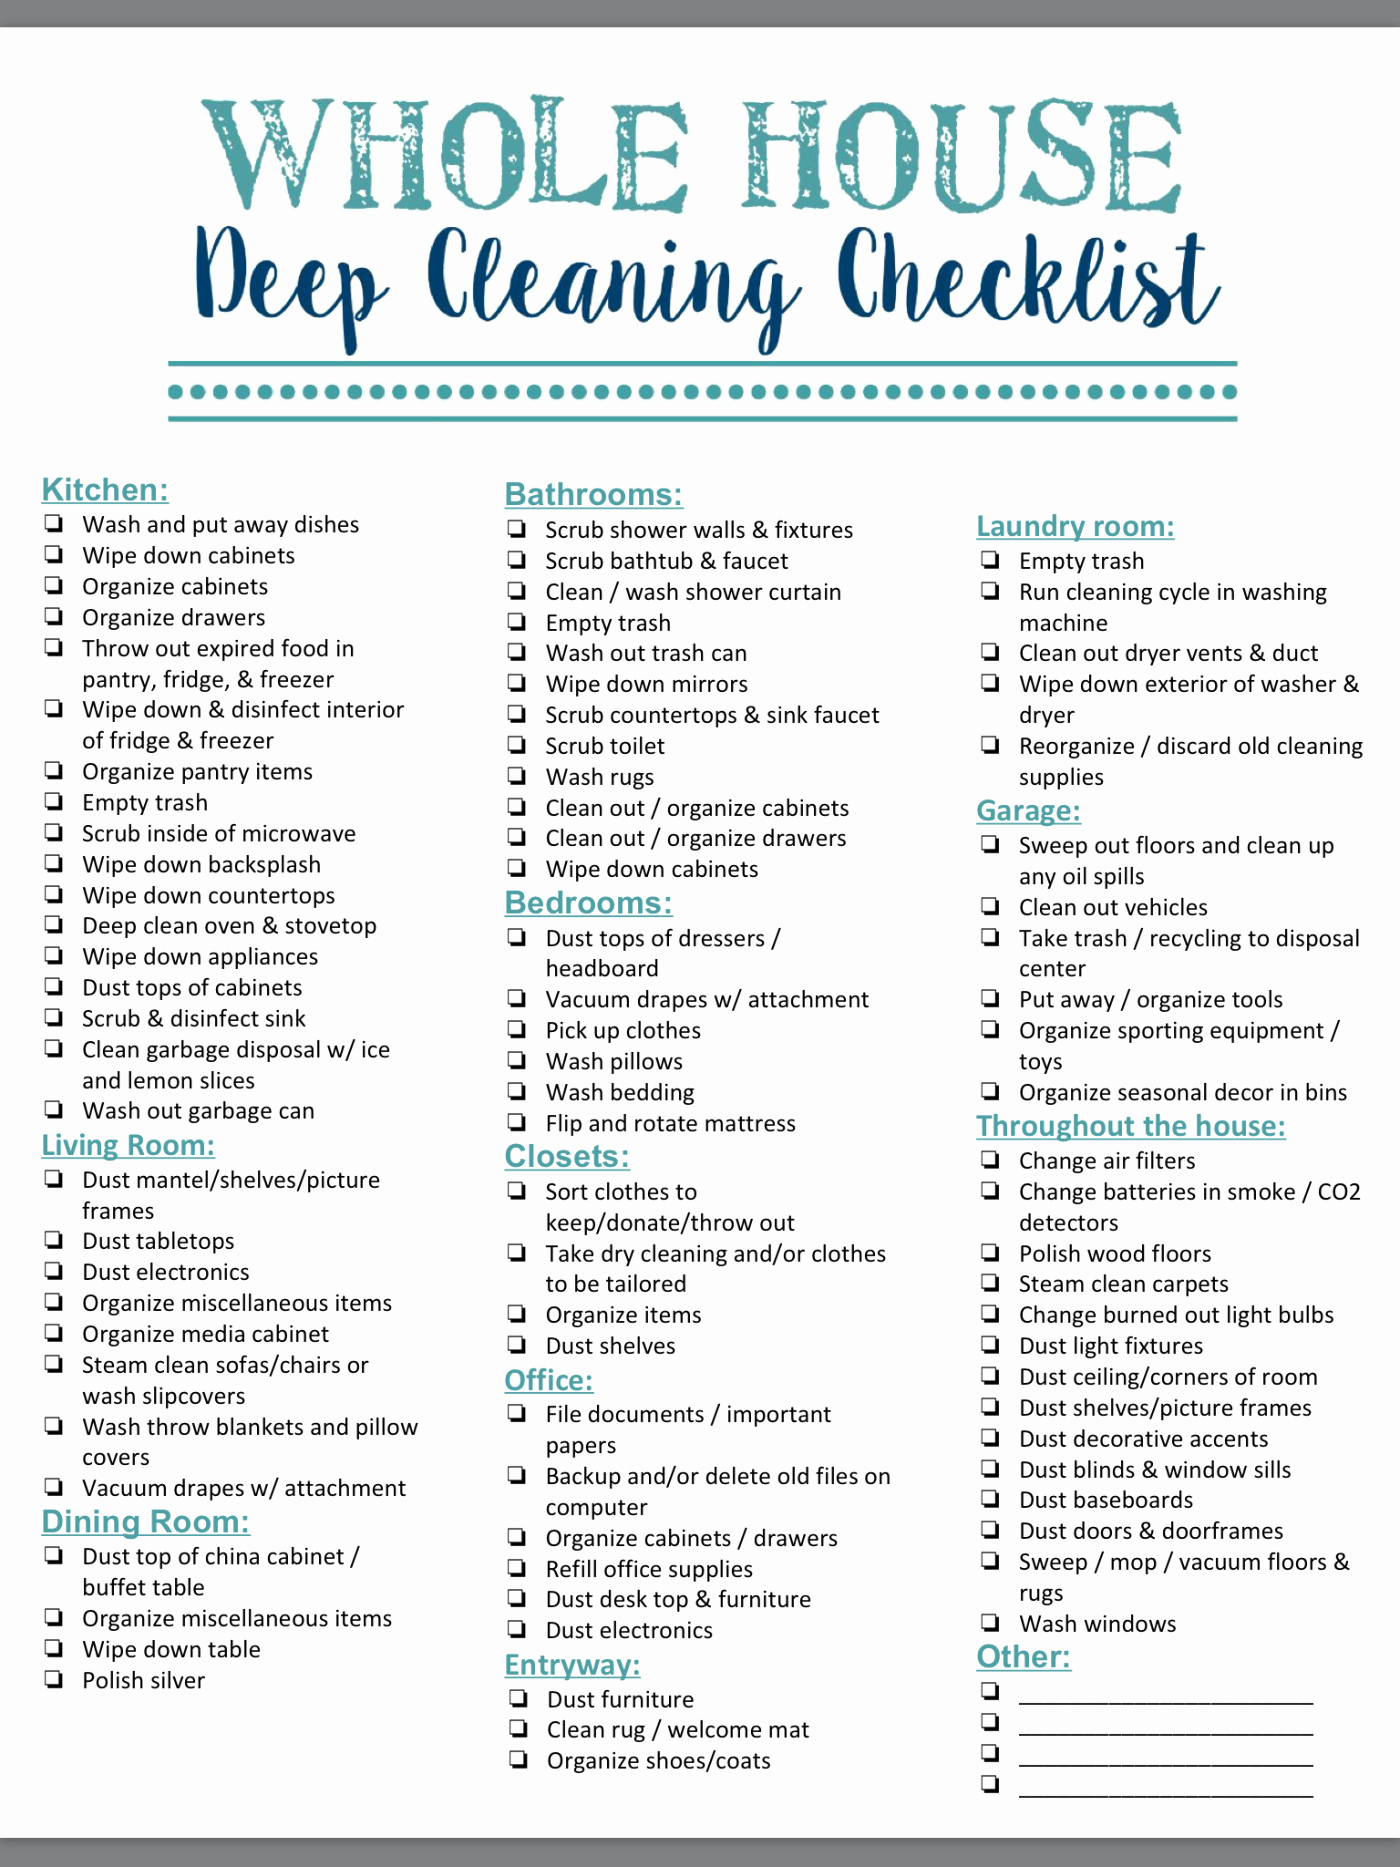 House Cleaning Schedule Template Awesome 40 Helpful House Cleaning Checklists for You